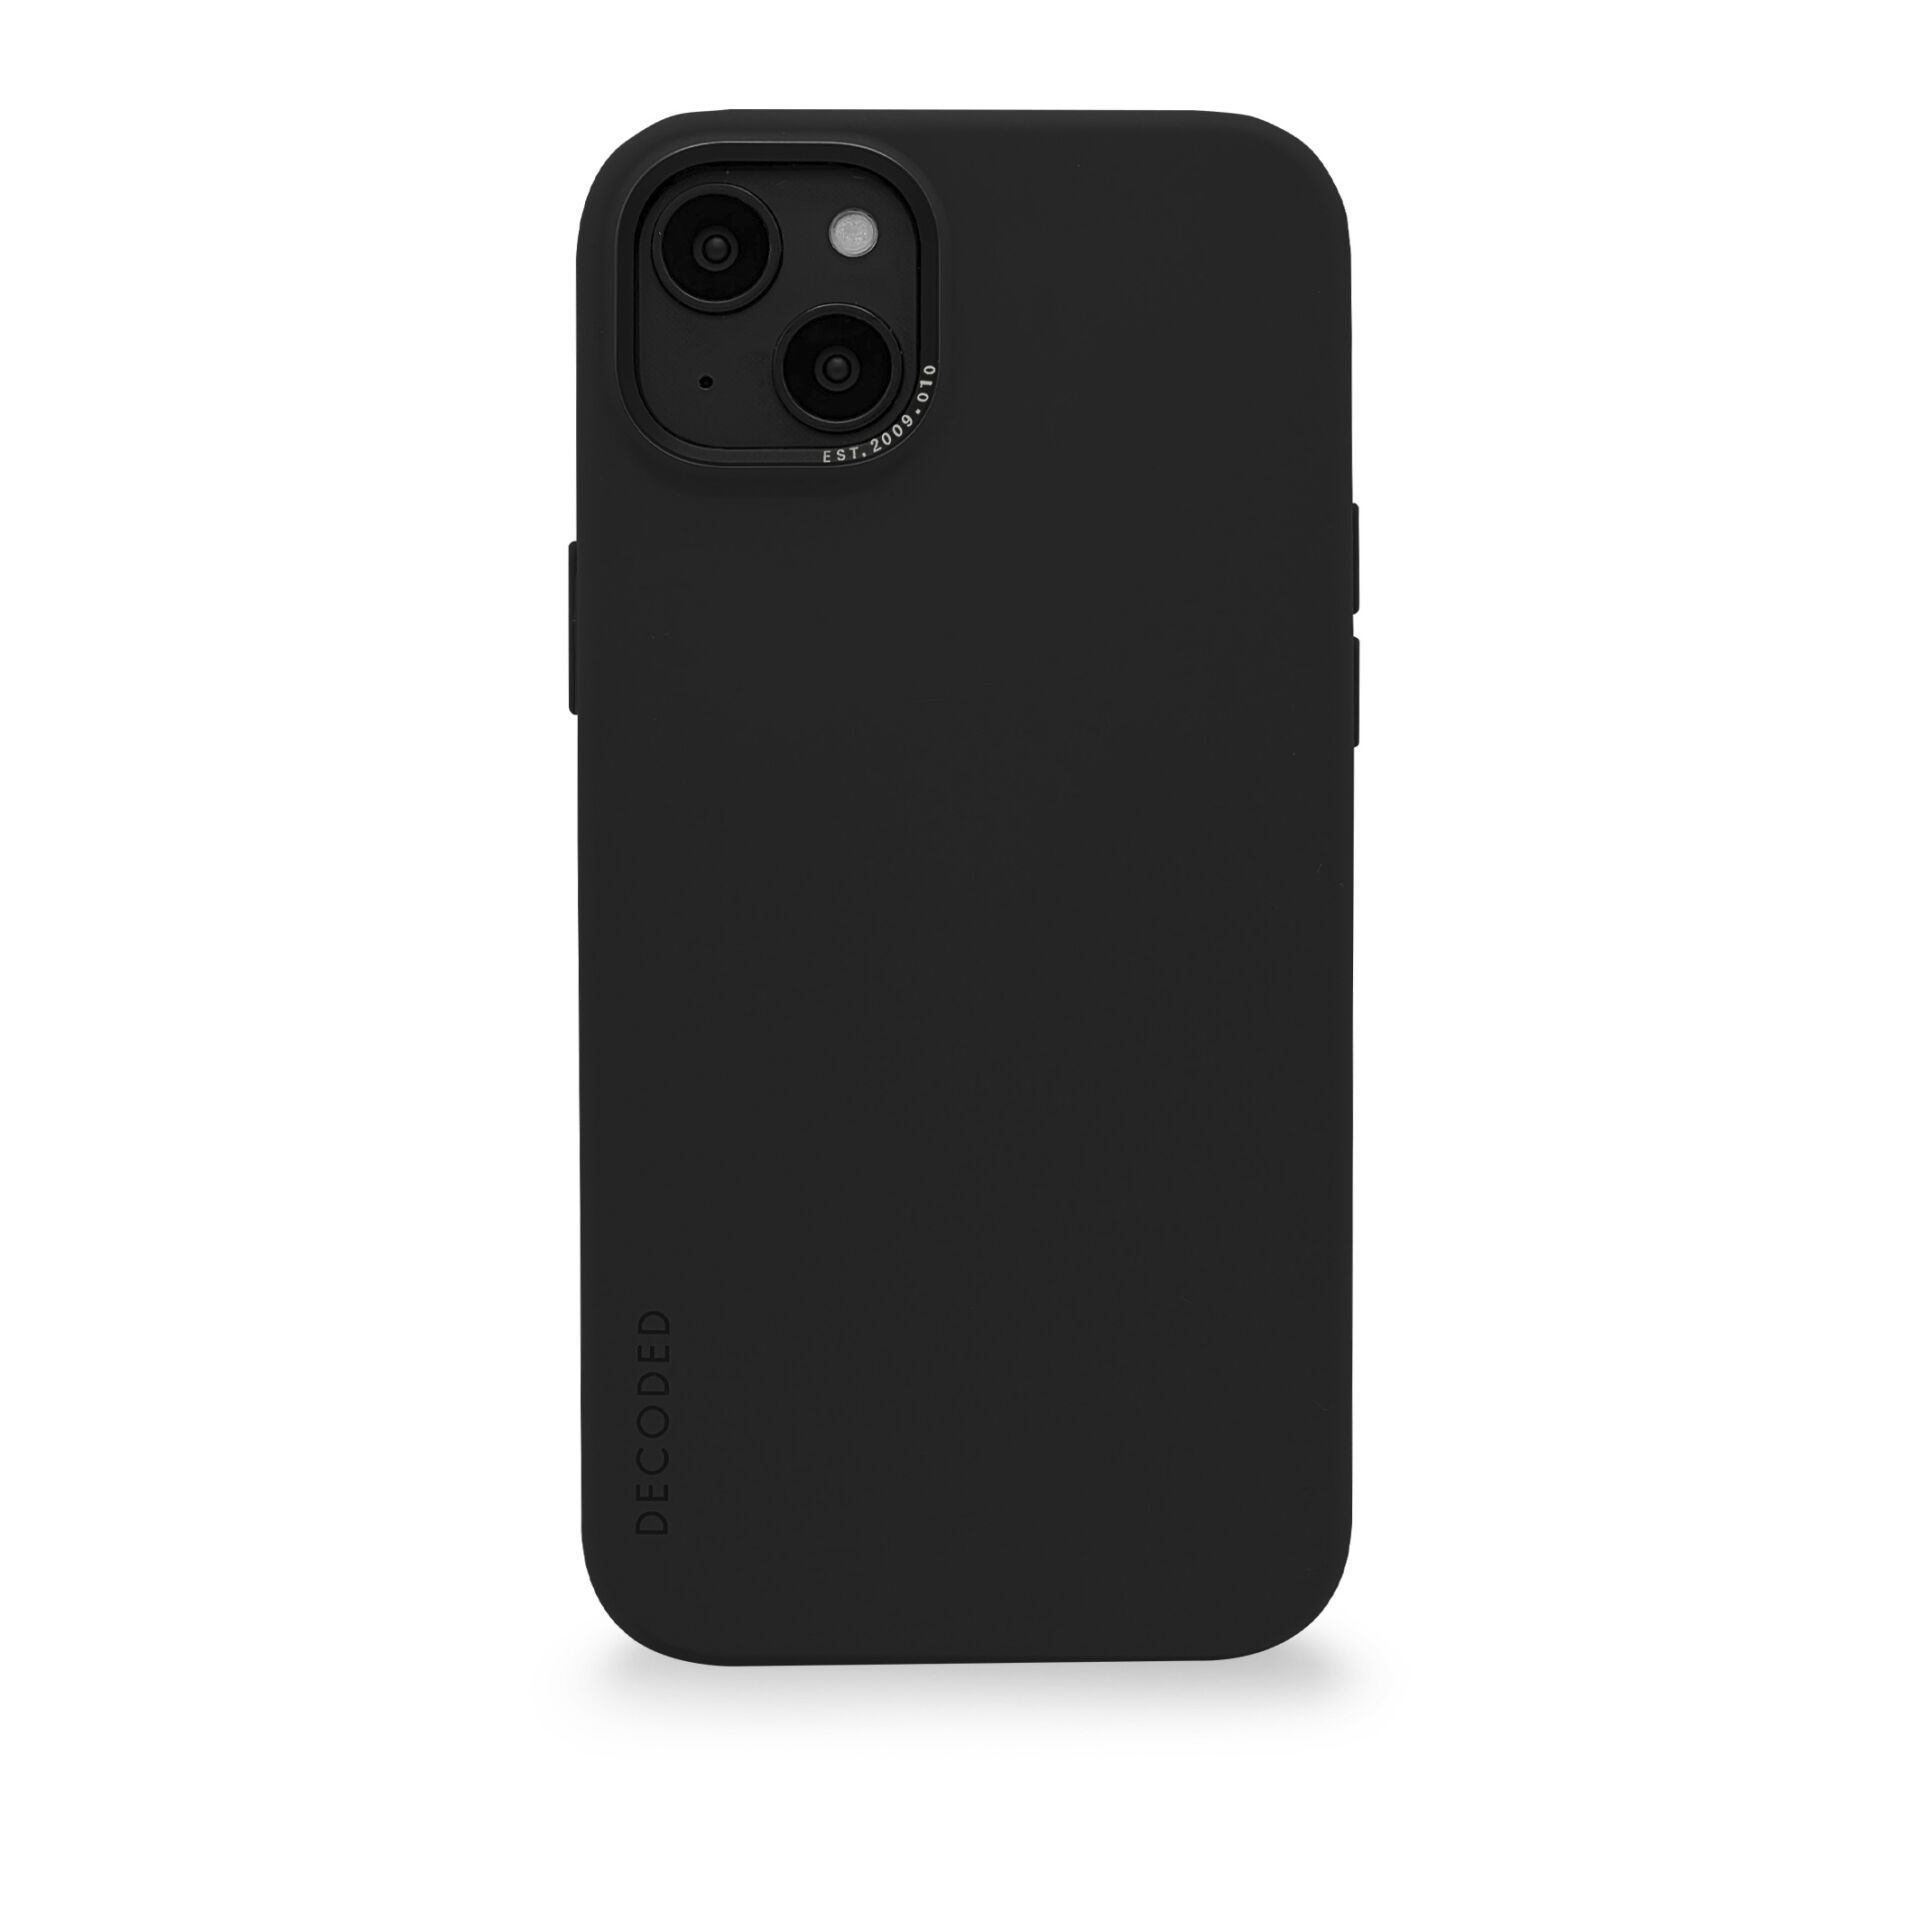 iPhone Backcover, Silicone 14 Backcover AntiMicrobial Plus, DECODED Apple, Charcoal, Charcoal